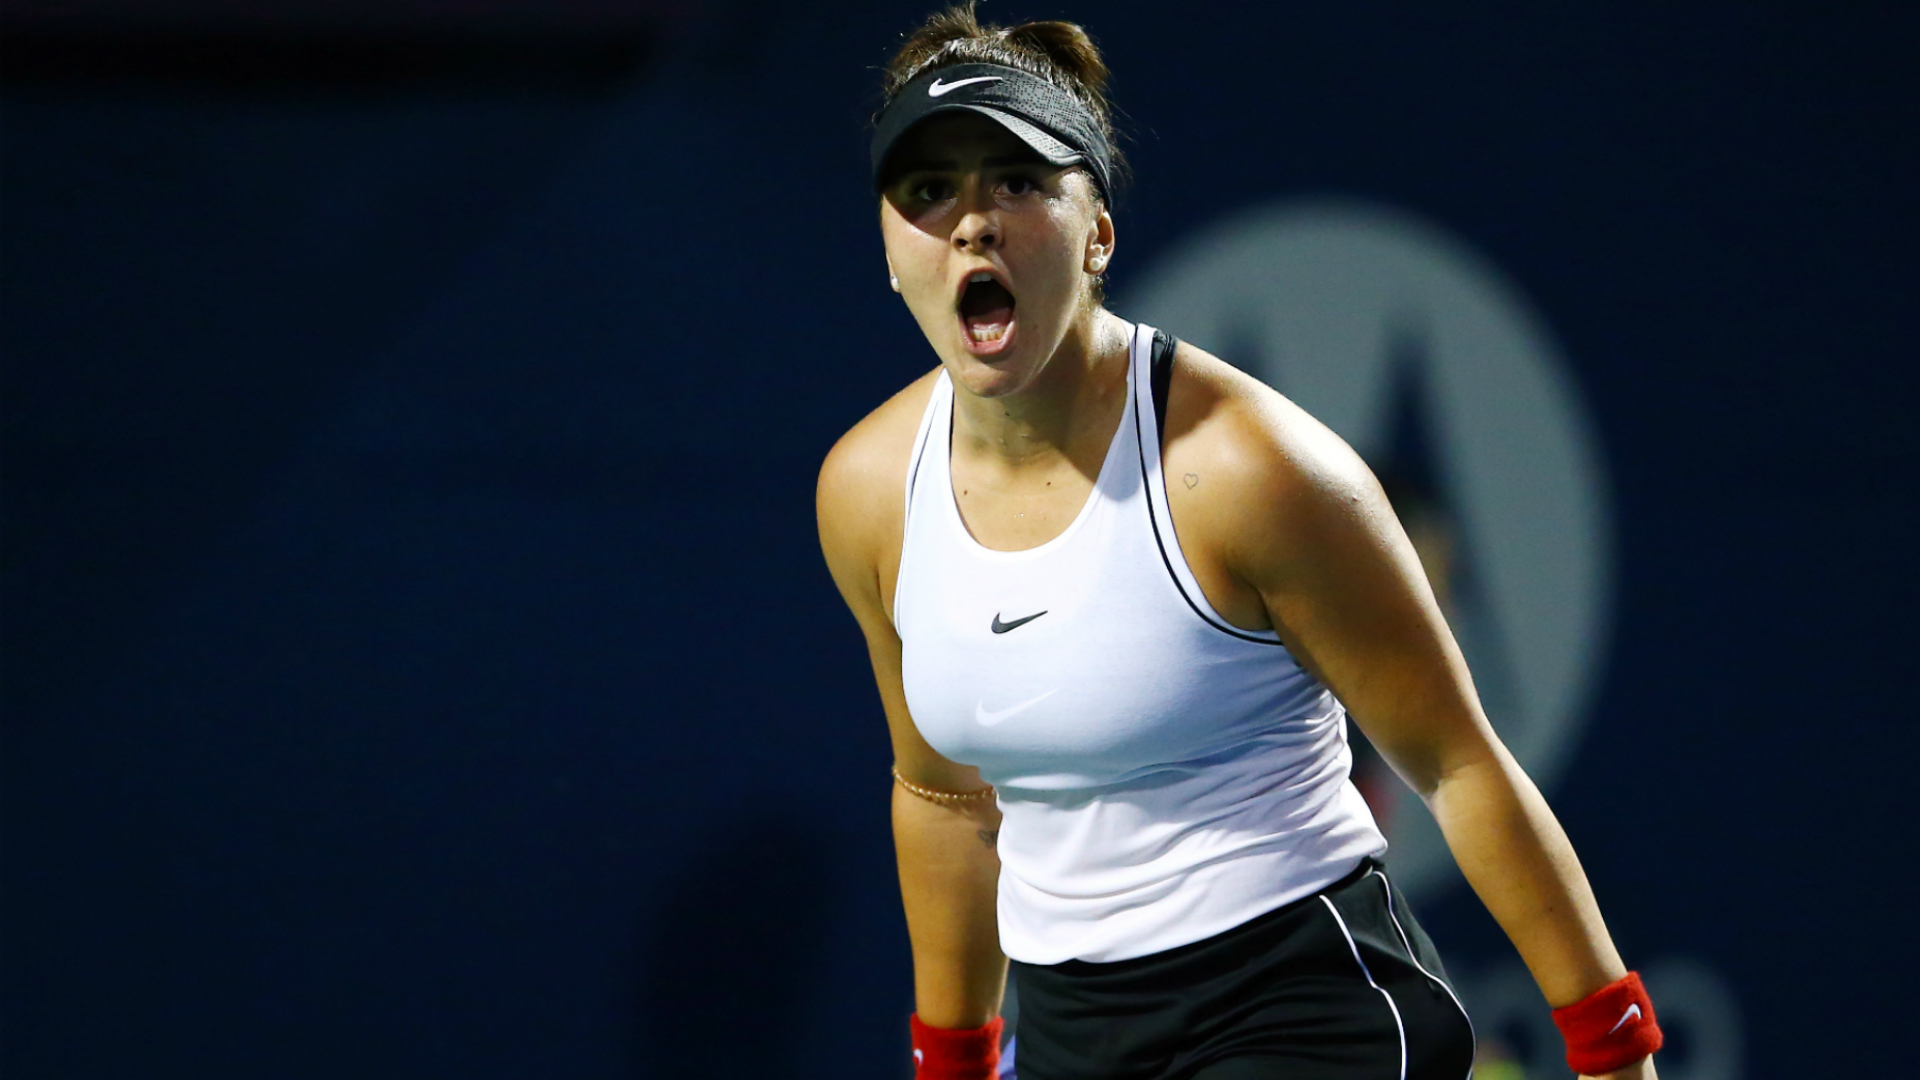 Rogers Cup 2019: Bianca Andreescu comes back to defeat ...